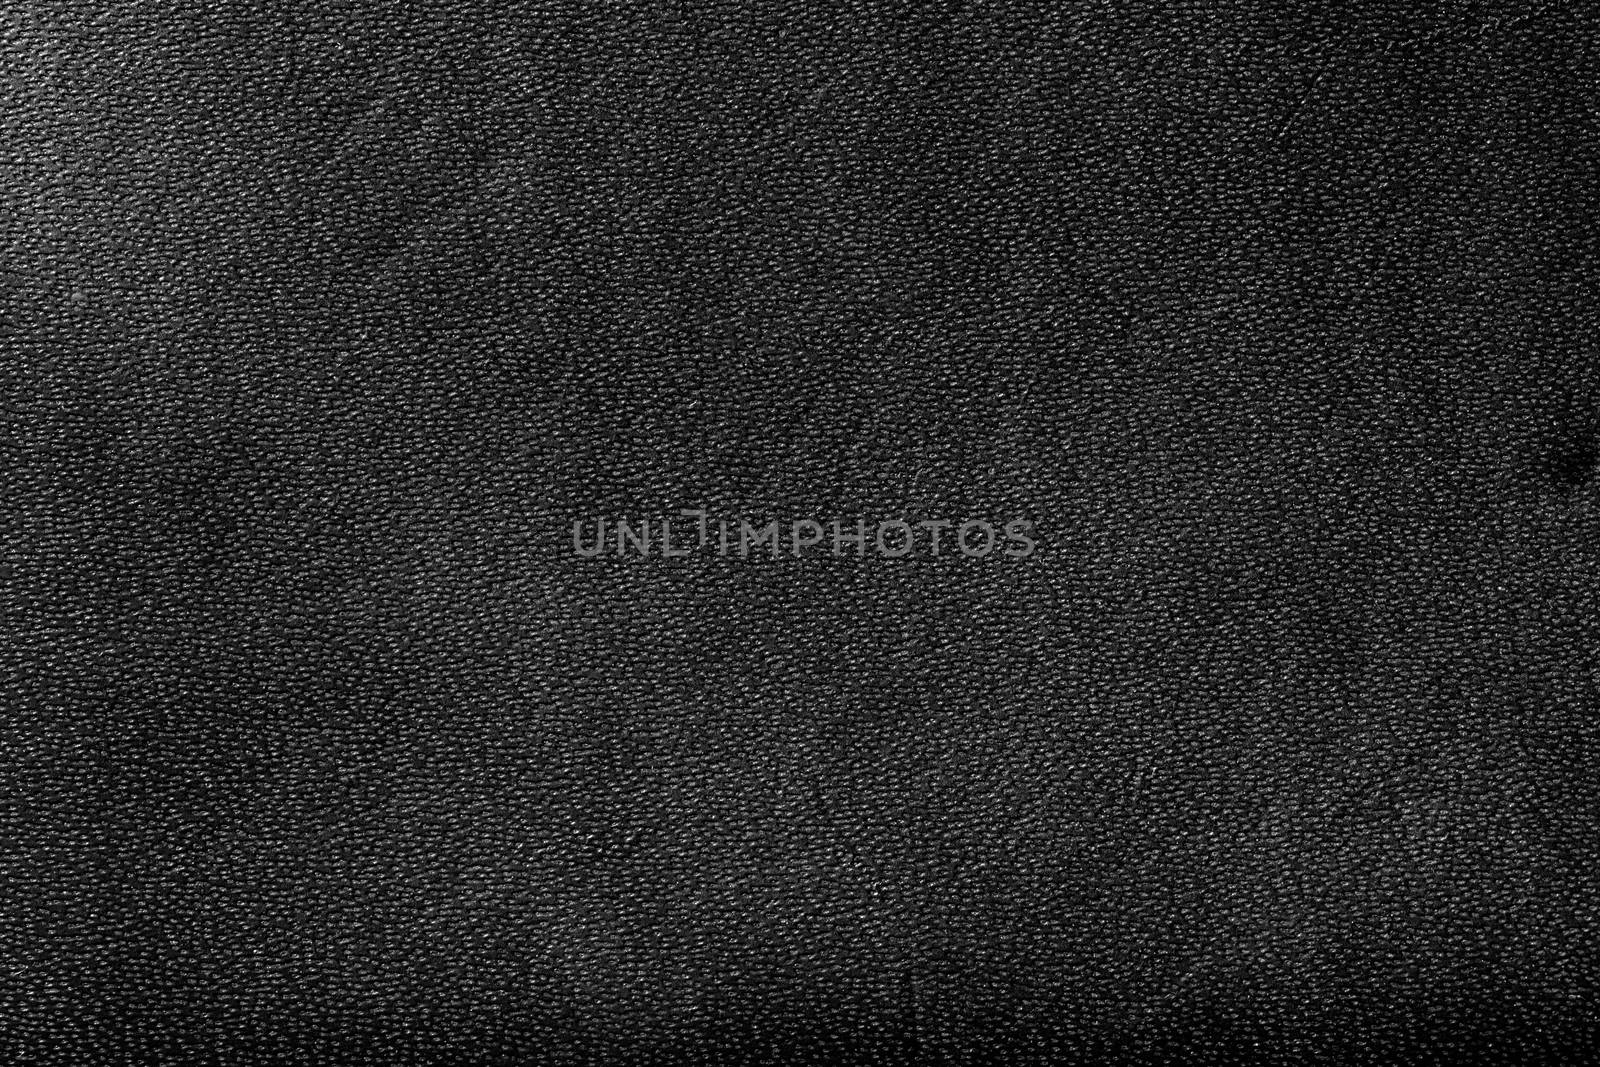 Genuine black leather background, pattern by photocreo